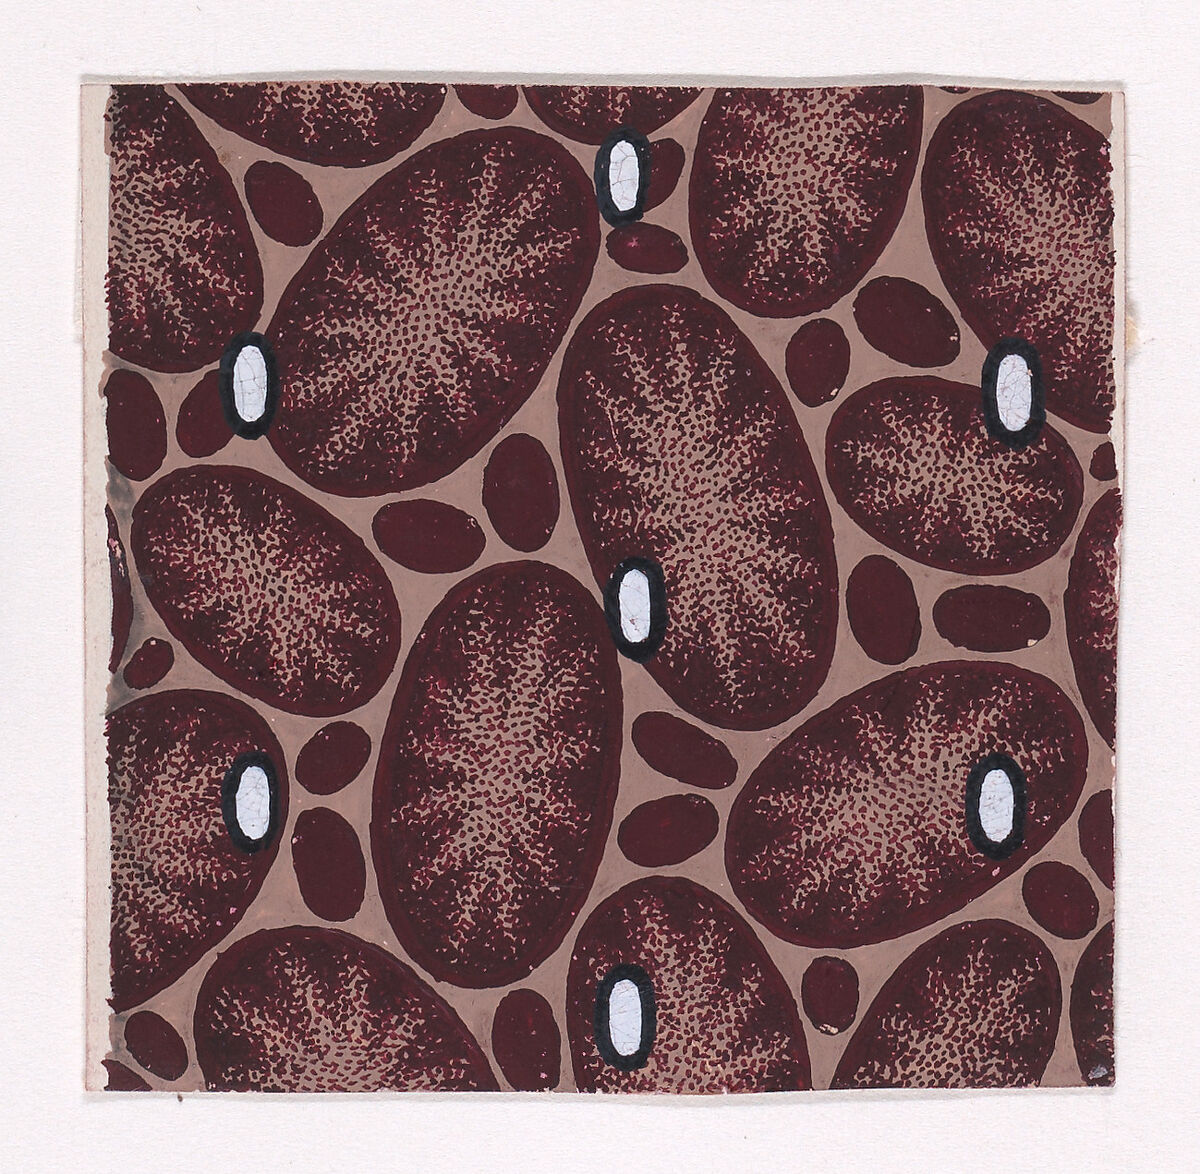 Textile Design with Scattered Ovals, Anonymous, Alsatian, 19th century, Gouache 